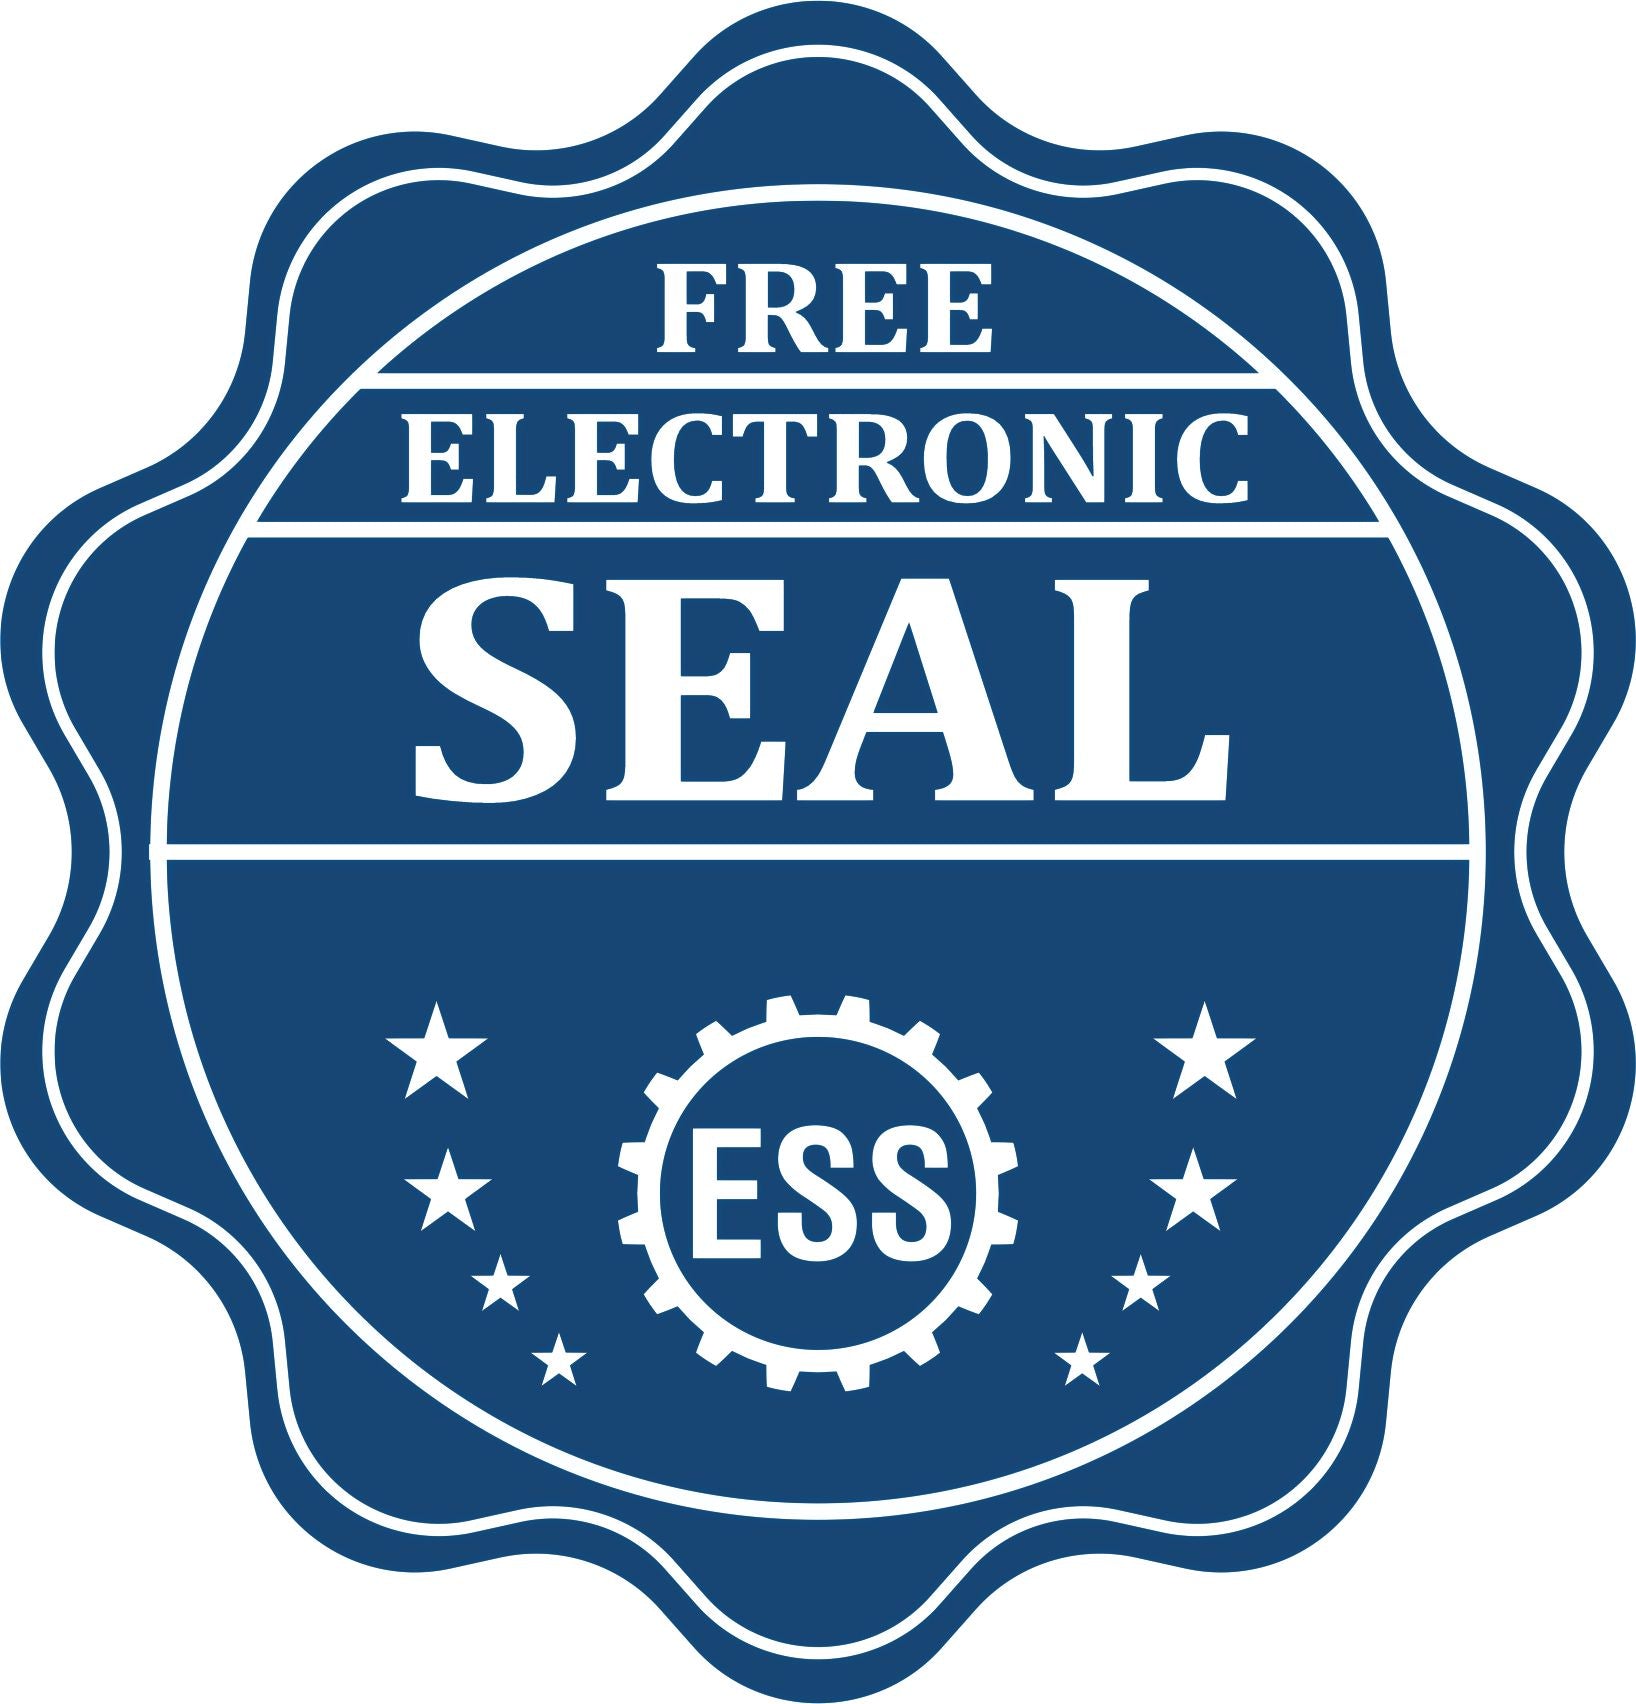 A badge showing a free electronic seal for the Heavy Duty Cast Iron Guam Geologist Seal Embosser with stars and the ESS gear on the emblem.